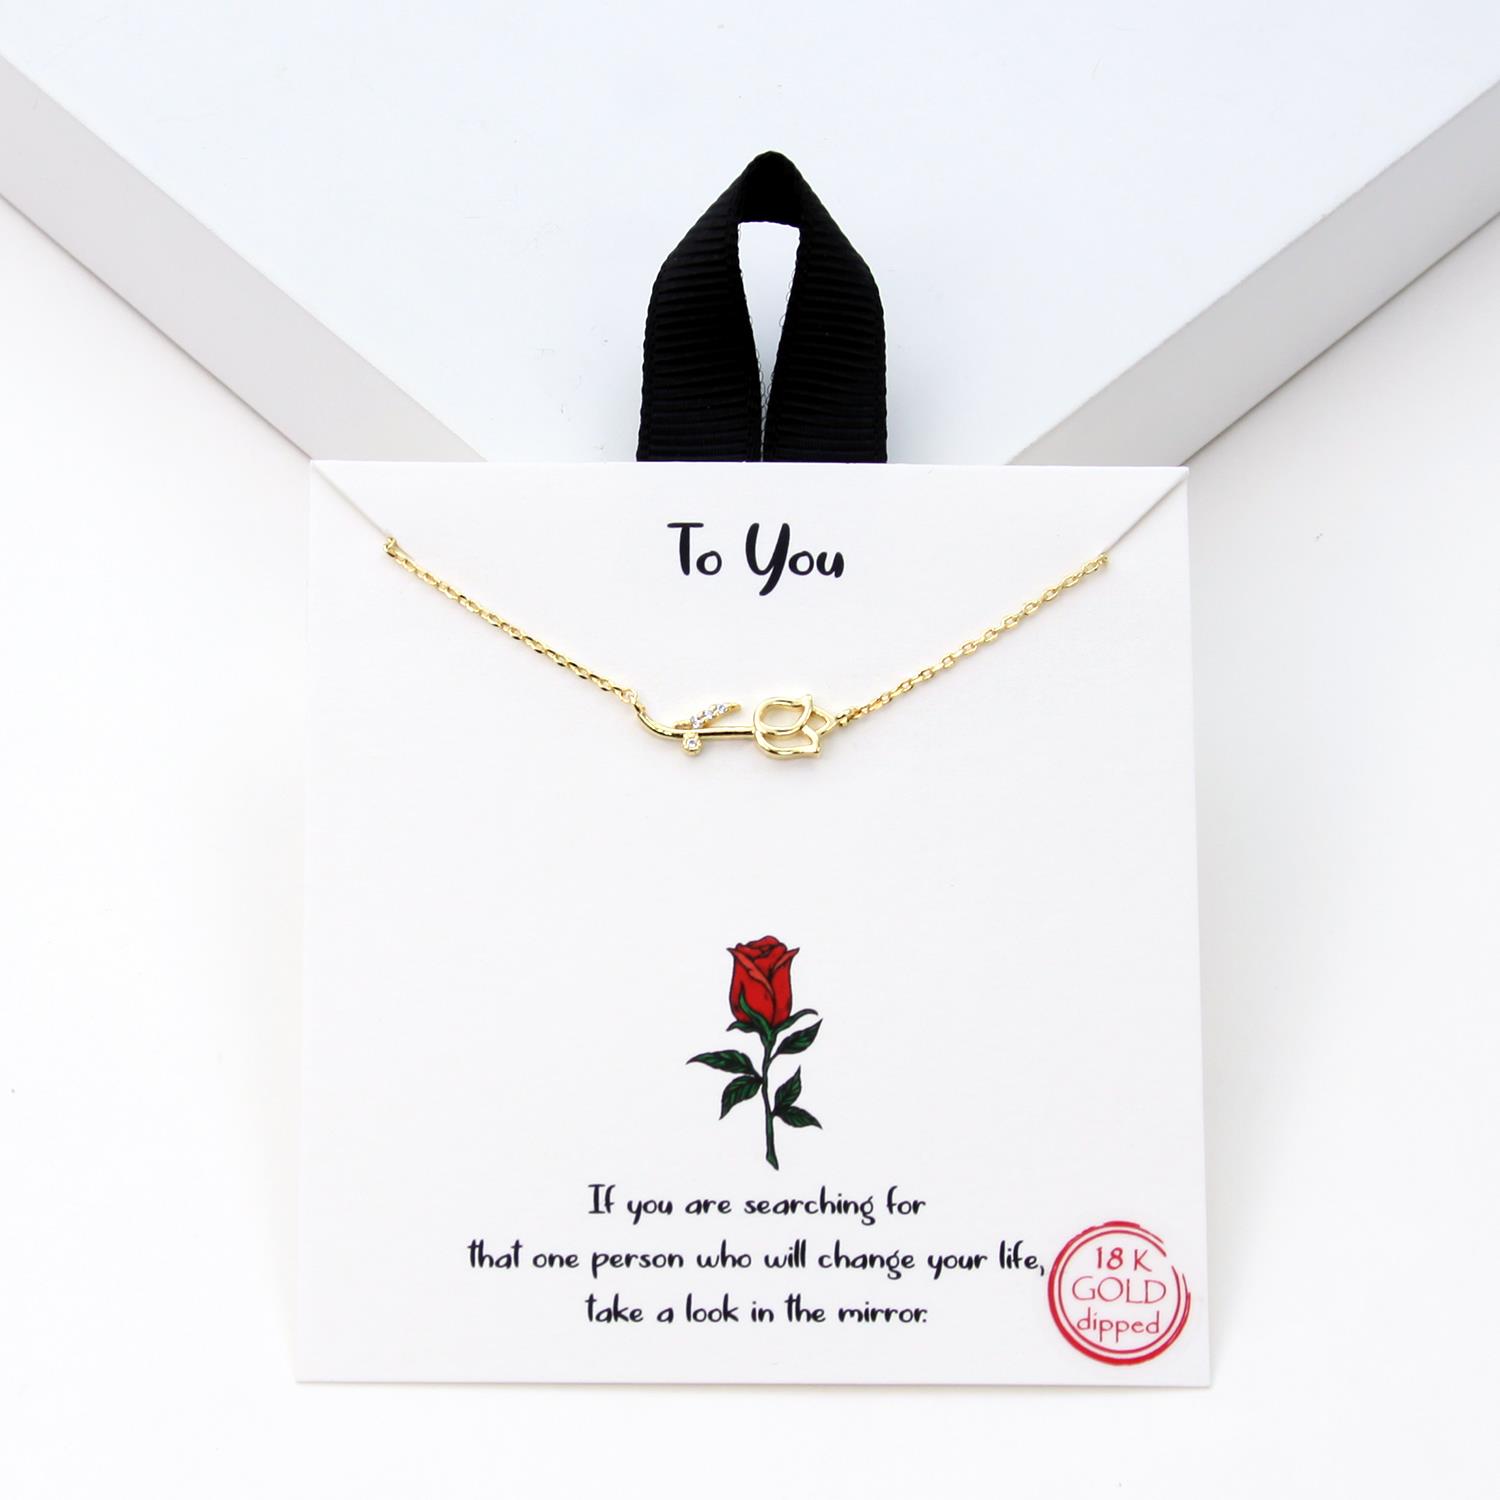 18K GOLD RHODIUM DIPPED TO YOU NECKLACE